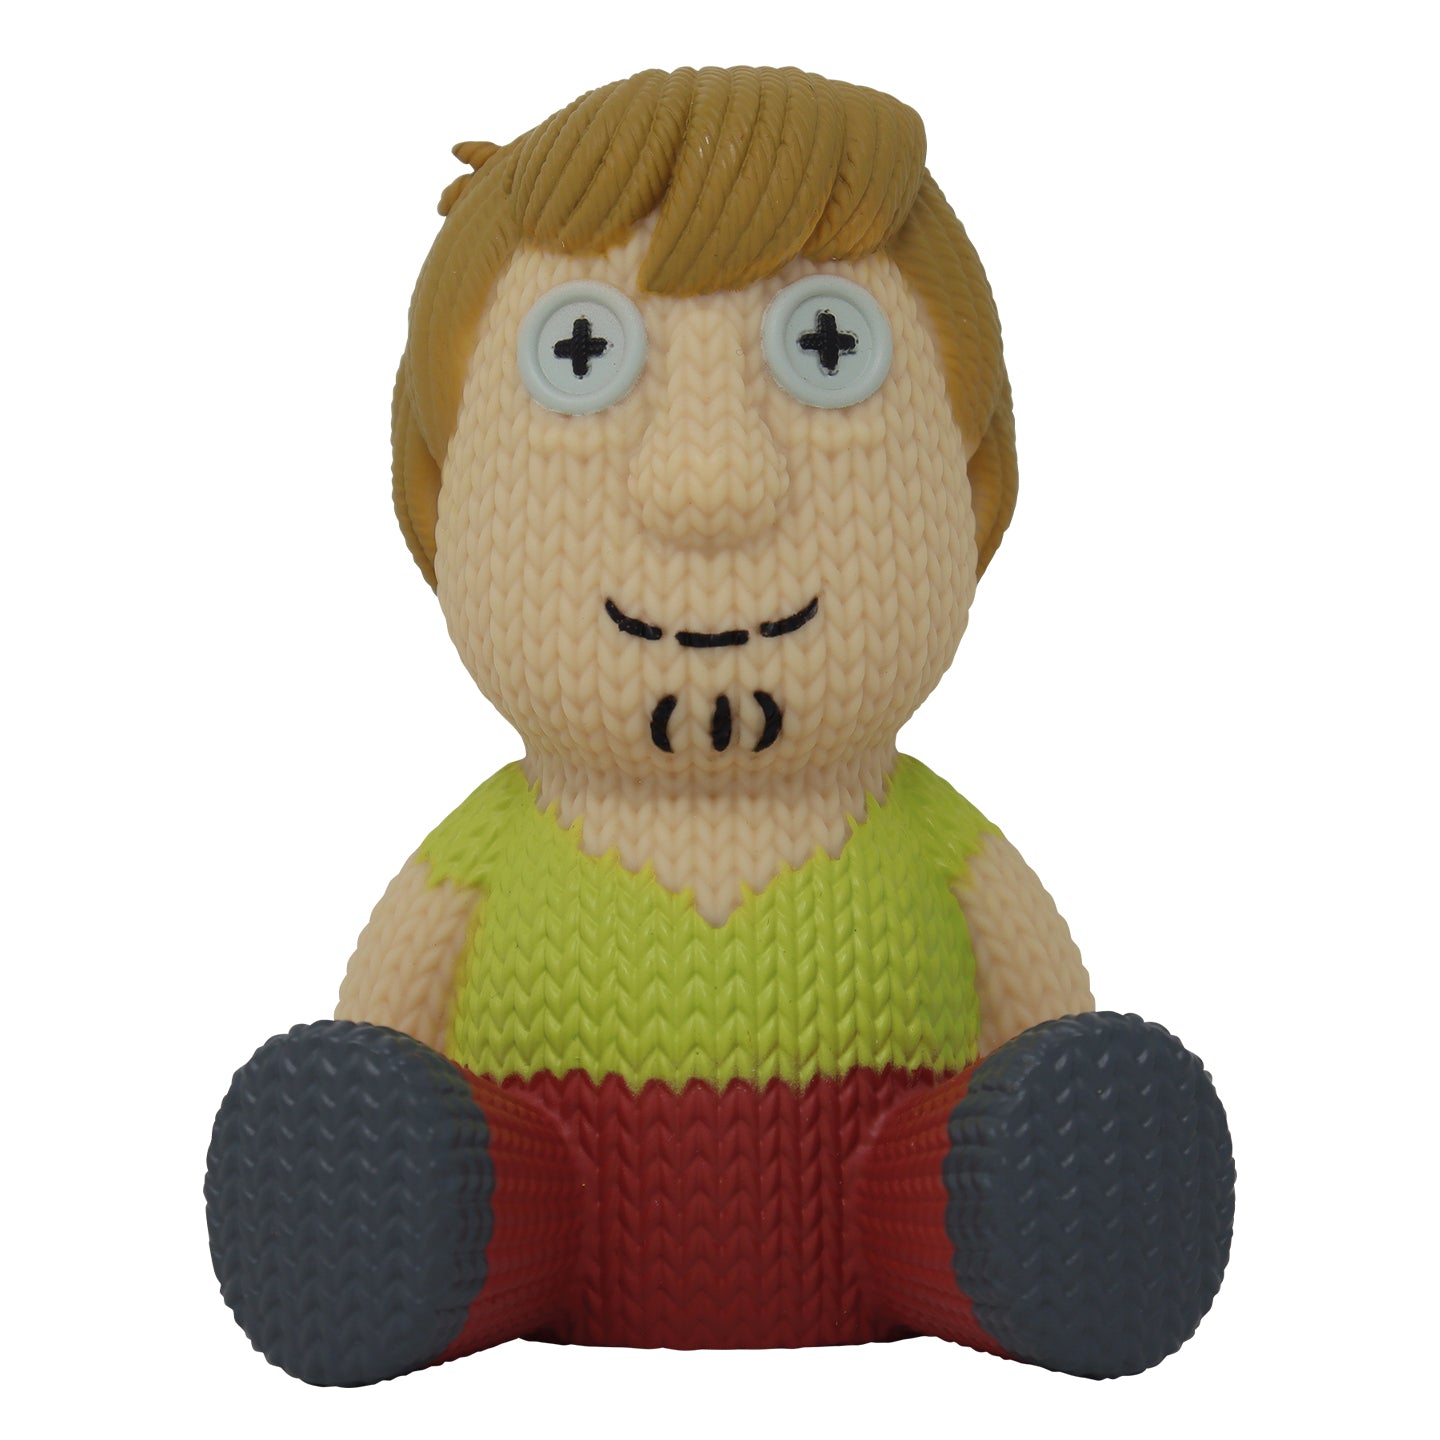 Scooby-Doo - Shaggy Collectible Vinyl Figure from Handmade By Robots